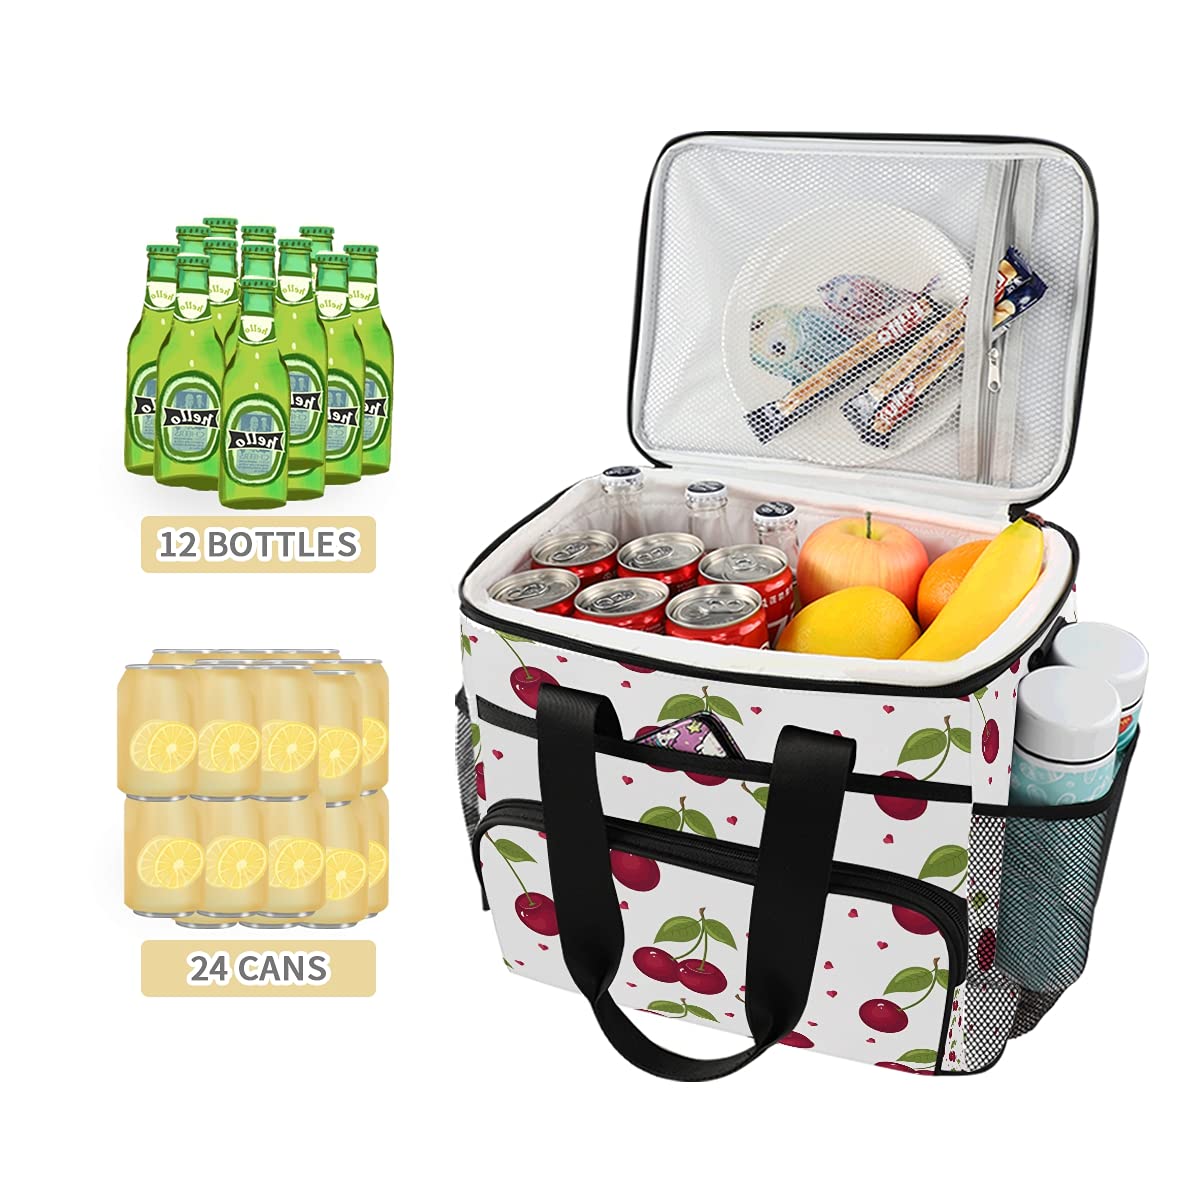 HMZXZ Large Cooler Lunch Bag Cute Cherry Pattern 24-Can (15L) Insulated Lunch Box Soft Leakproof Cooler Cooling Tote Bag for Adult Men Women Camping, Picnic, BBQ